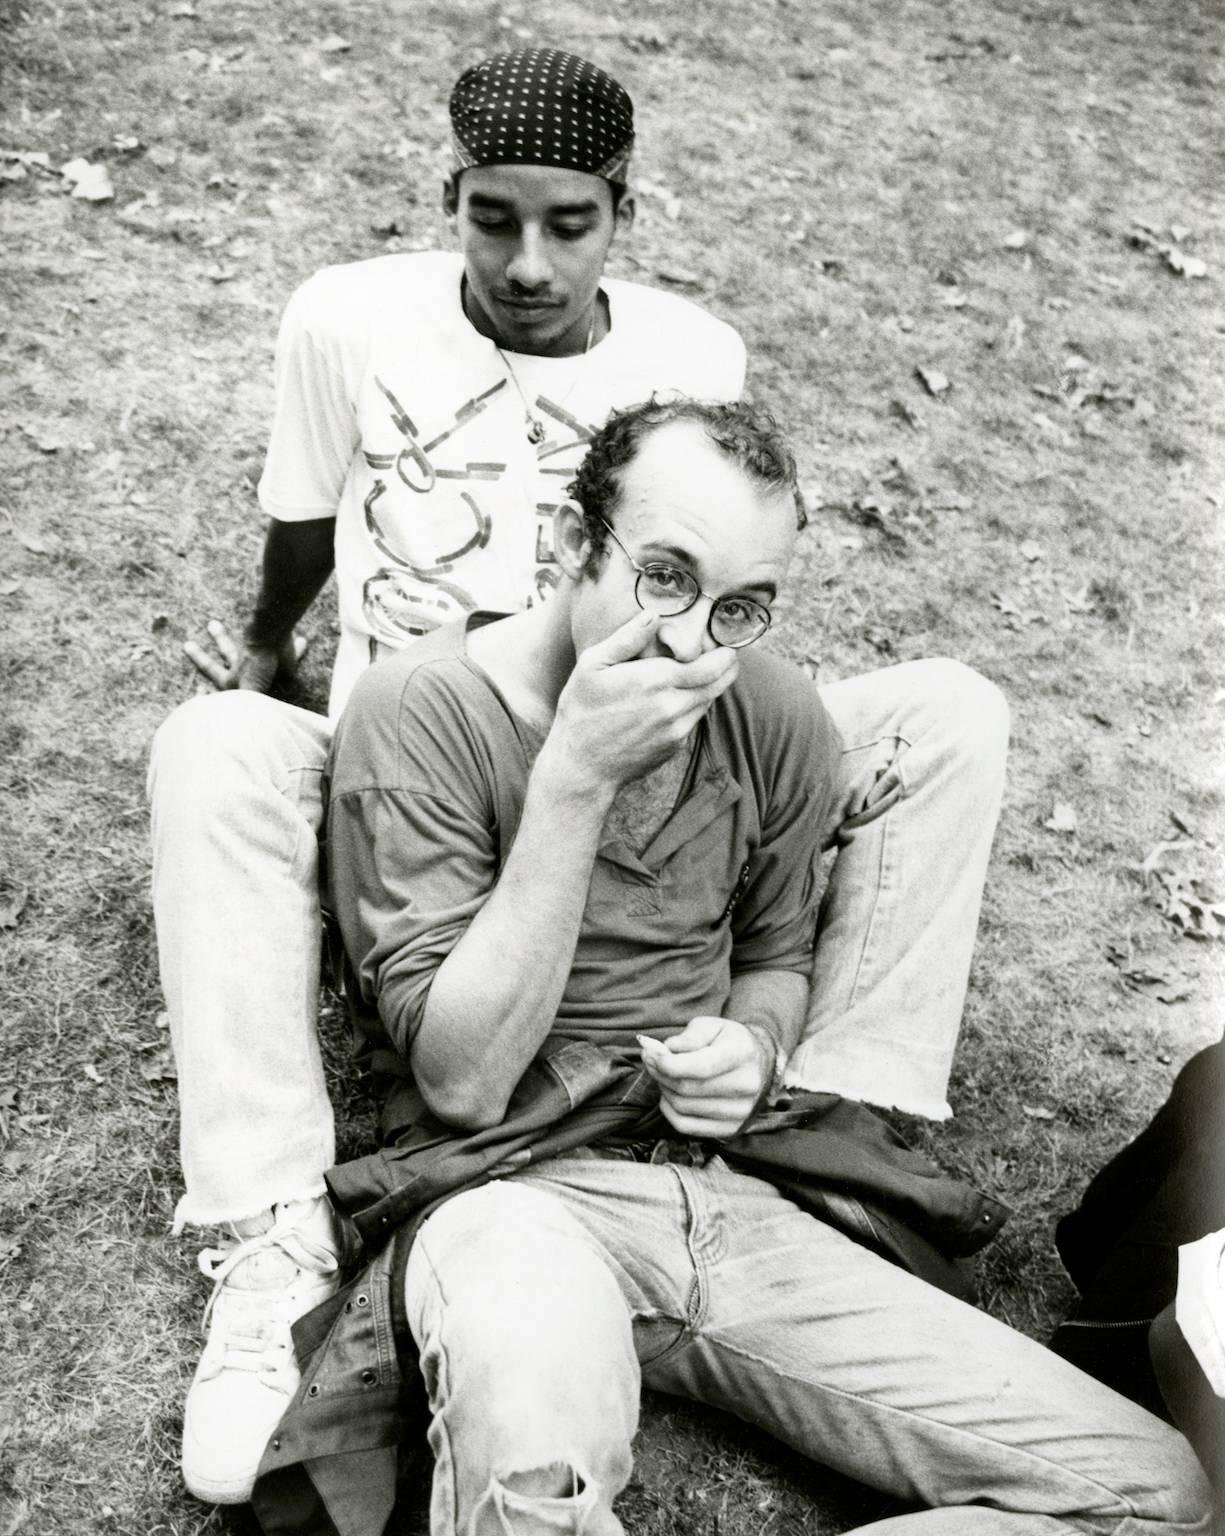 Andy Warhol Black and White Photograph - Photograph of Keith Haring and Juan Rivera in the Park